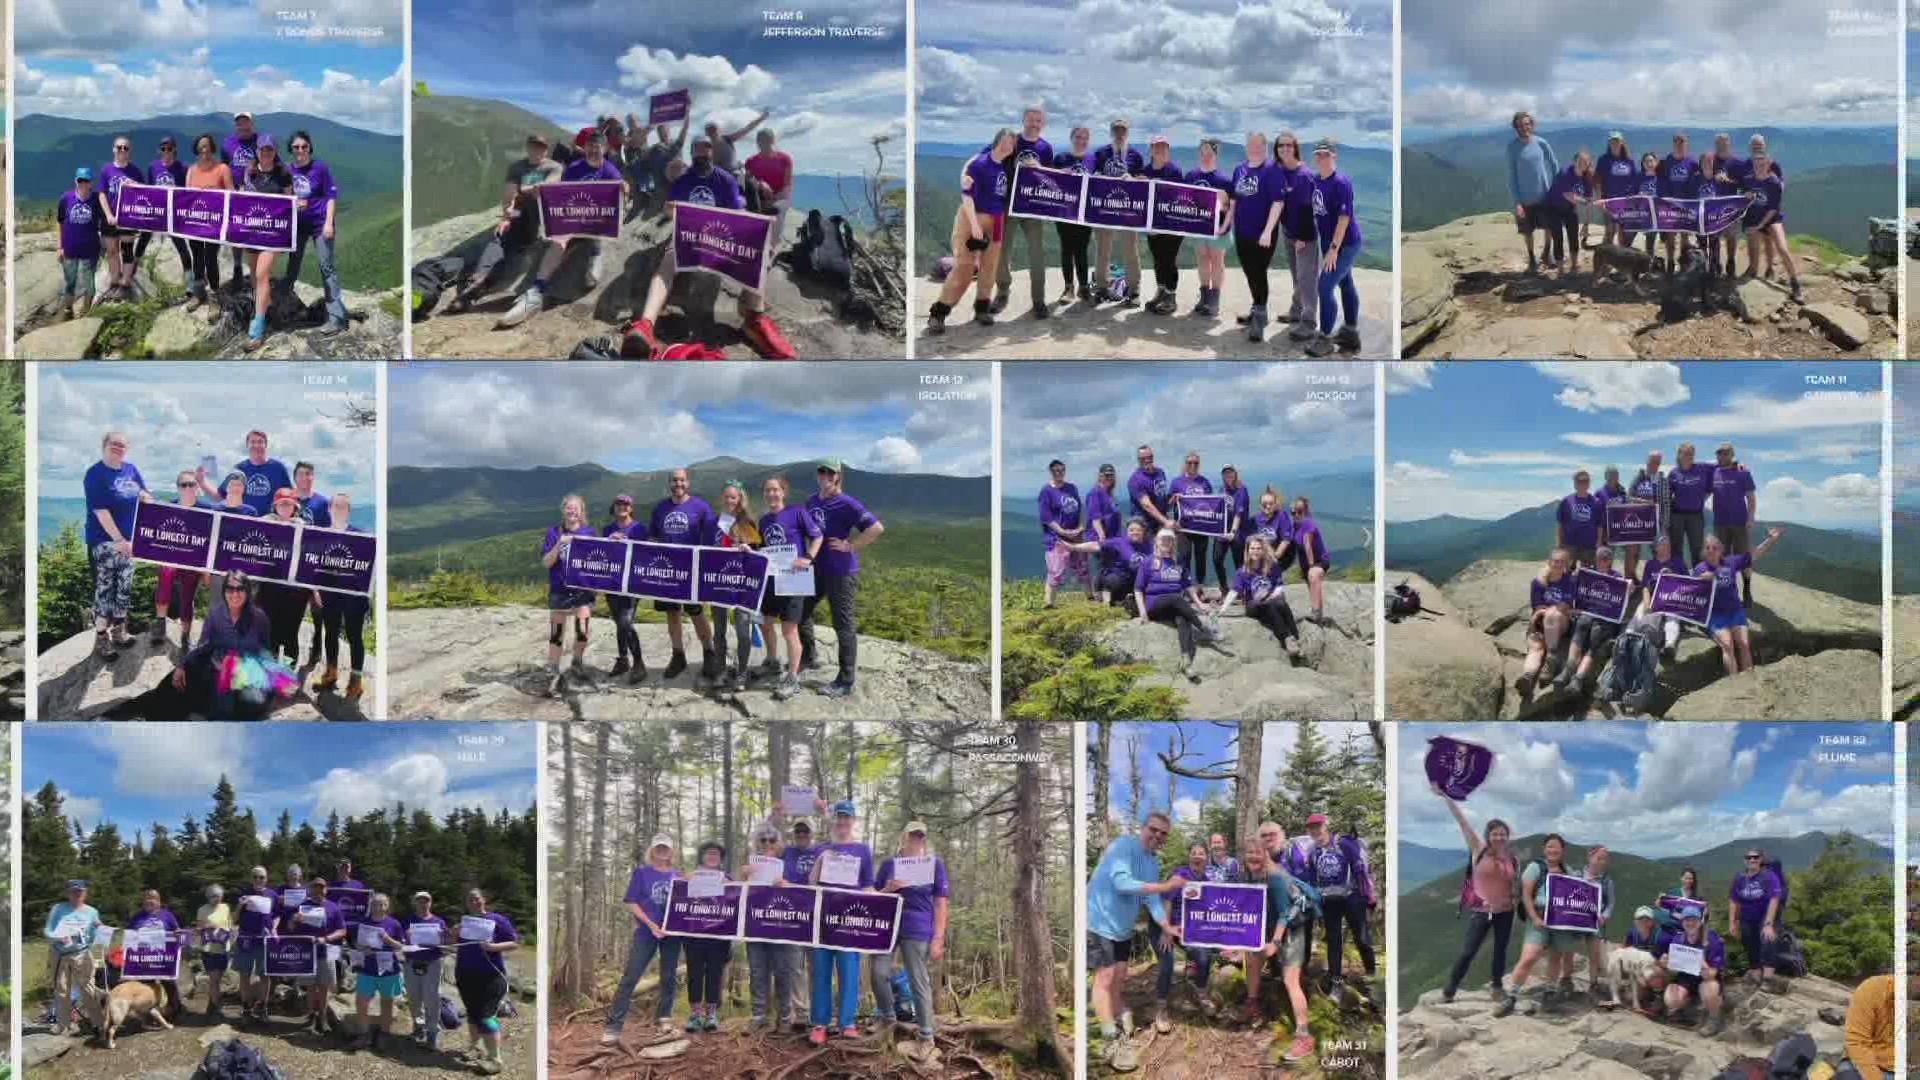 Hiking Buddies NH 48 trekked New Hampshire’s 48 mountains over 4,000 feet elevation in one day to fundraise for Alzheimer’s association event.